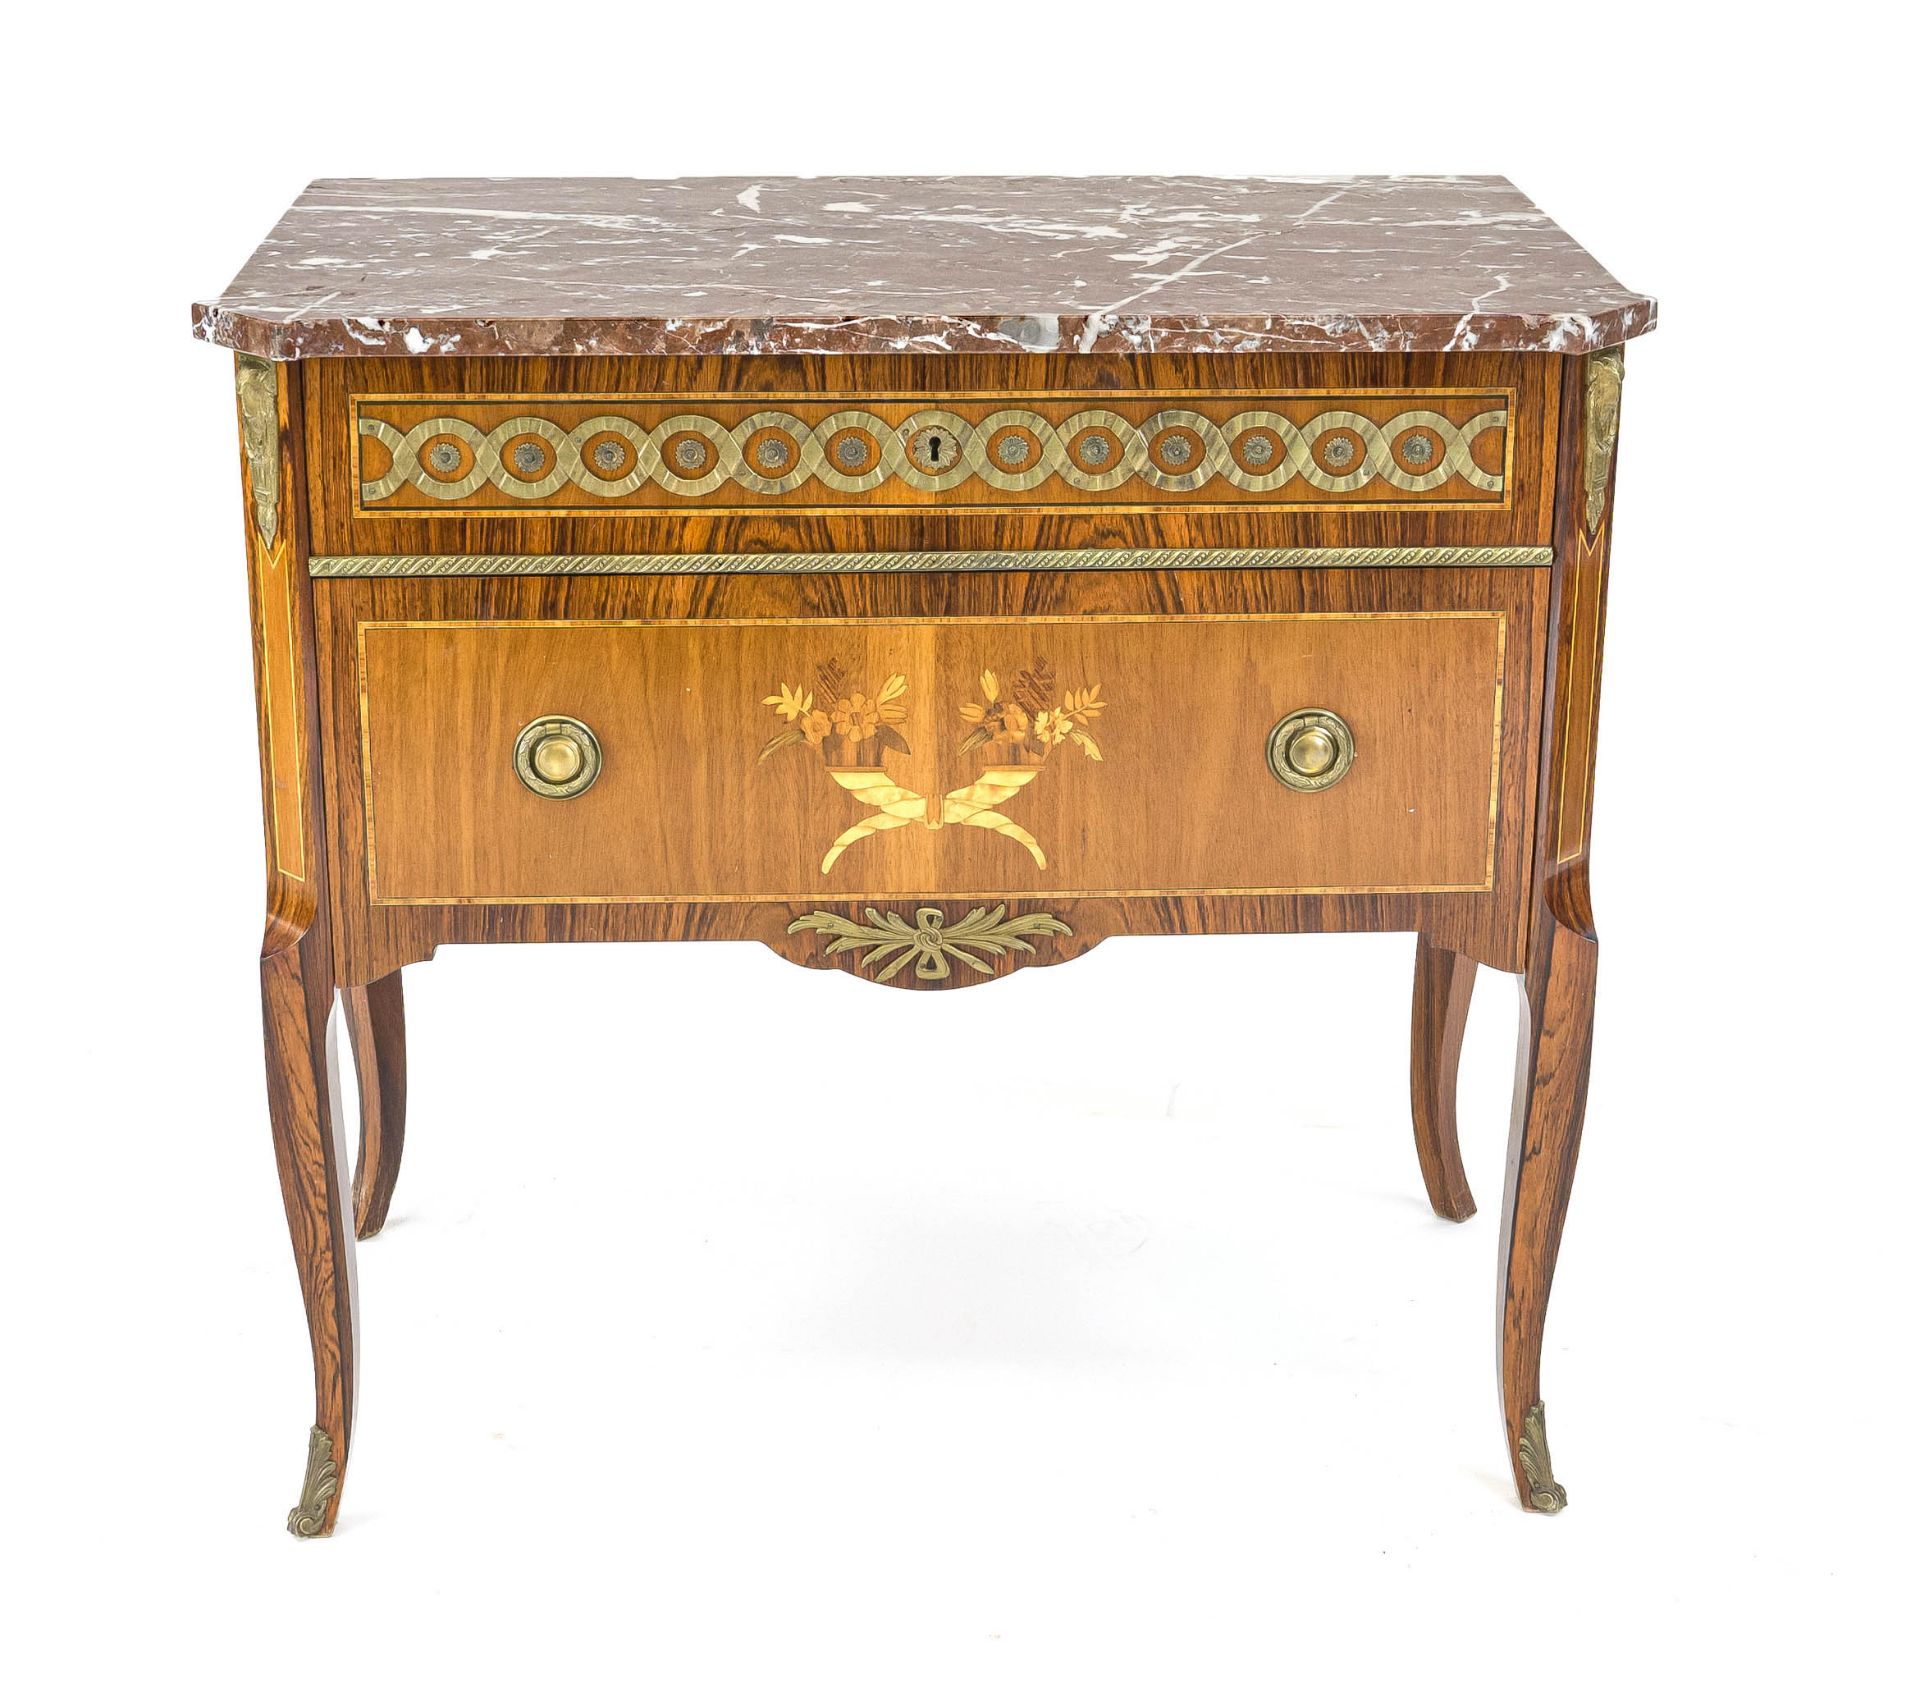 Magnificent Louis XVI-style chest of drawers, 20th century, walnut and other precious woods veneered - Image 2 of 2